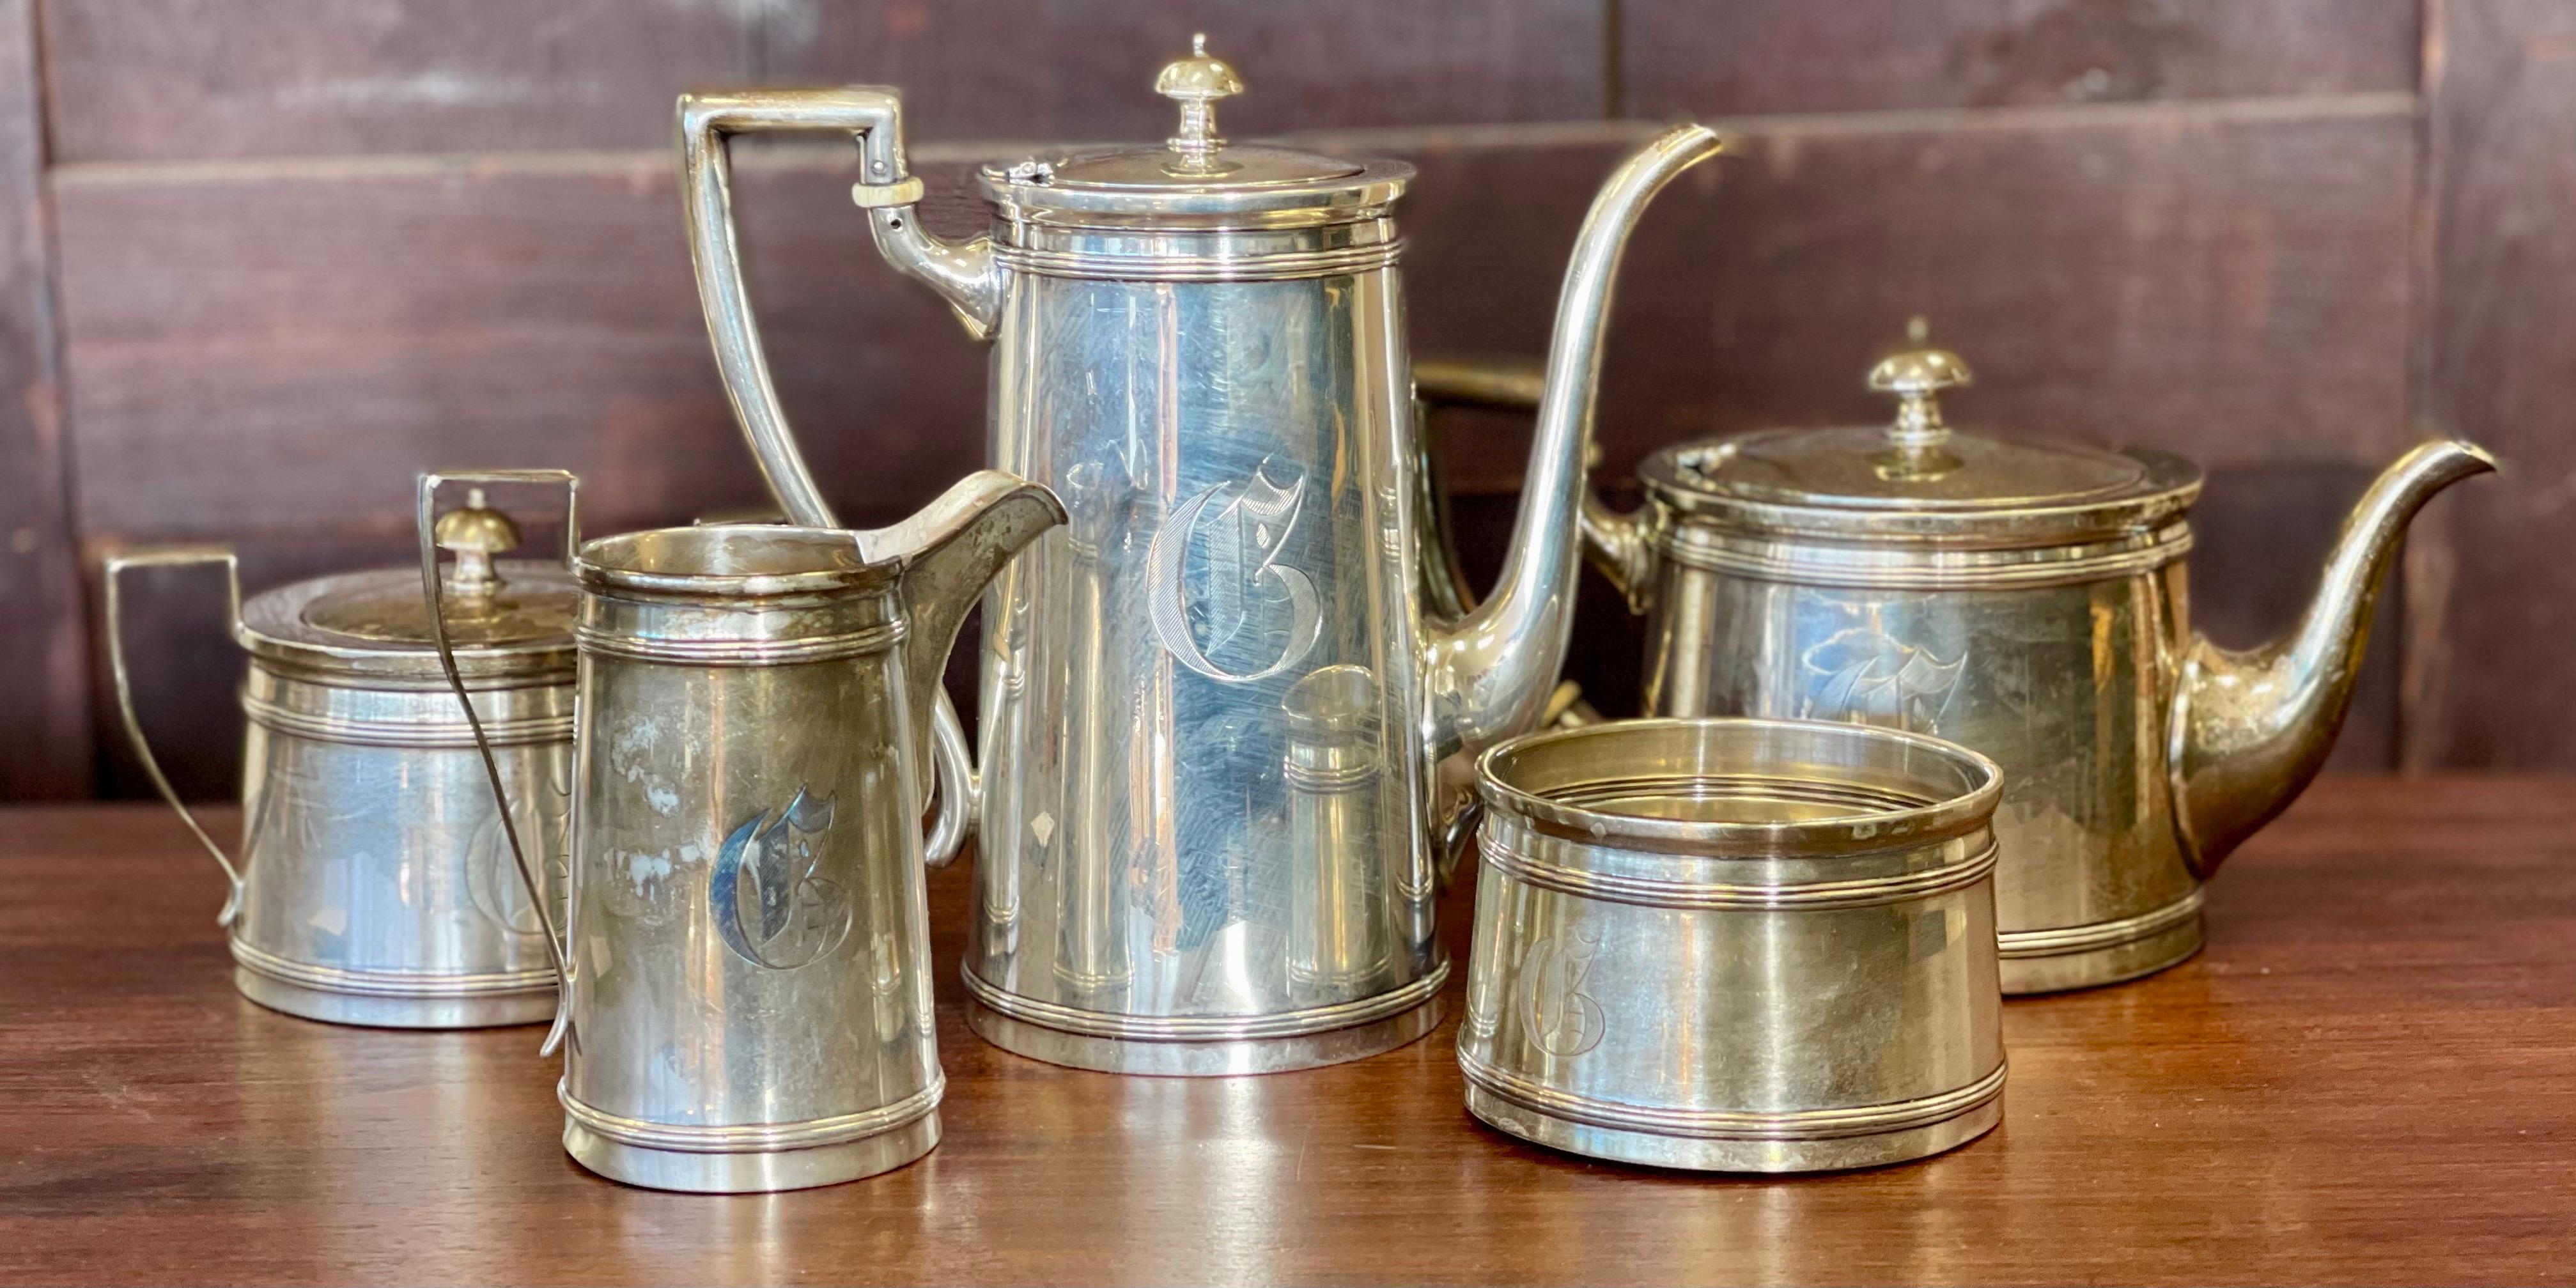 This exquisite tea and coffee set is a rare beauty that will add a touch of elegance to any home. The set is made of high-quality sterling silver (.925) and features an art deco style with a stunning Meriden Britannia pattern. The set consists of